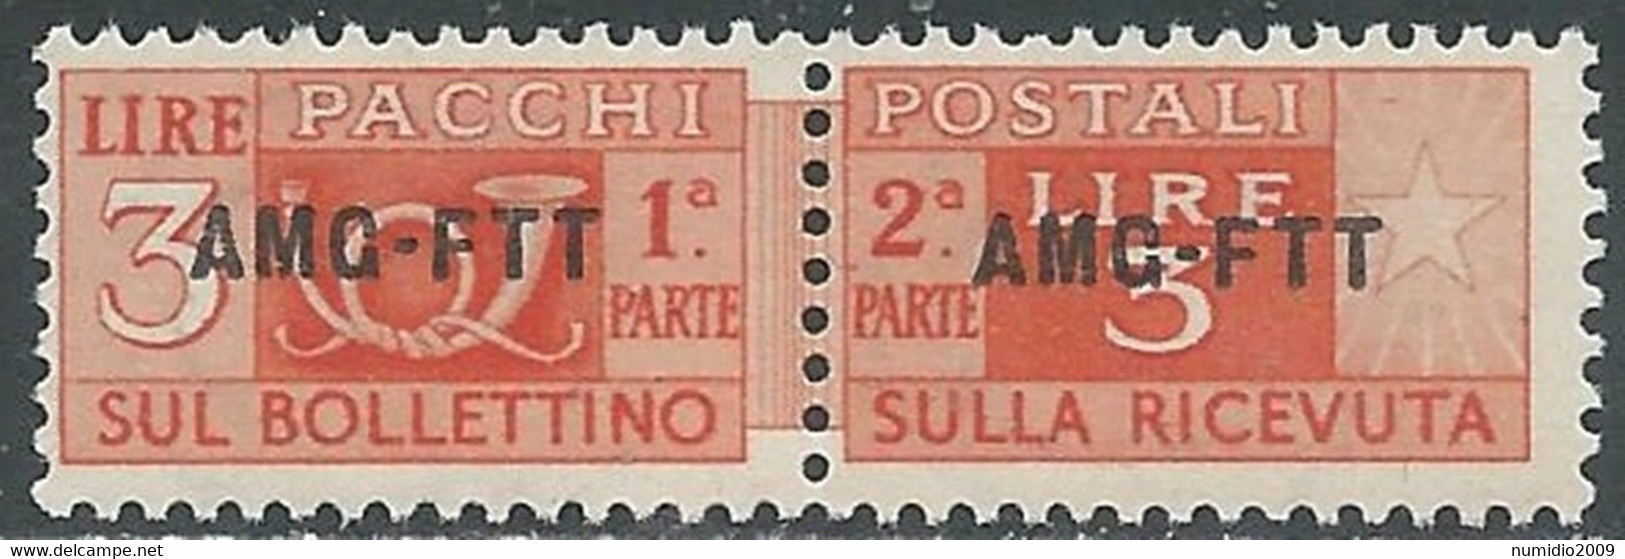 1949-53 TRIESTE A PACCHI POSTALI 3 LIRE MNH ** - RE24-3 - Postal And Consigned Parcels